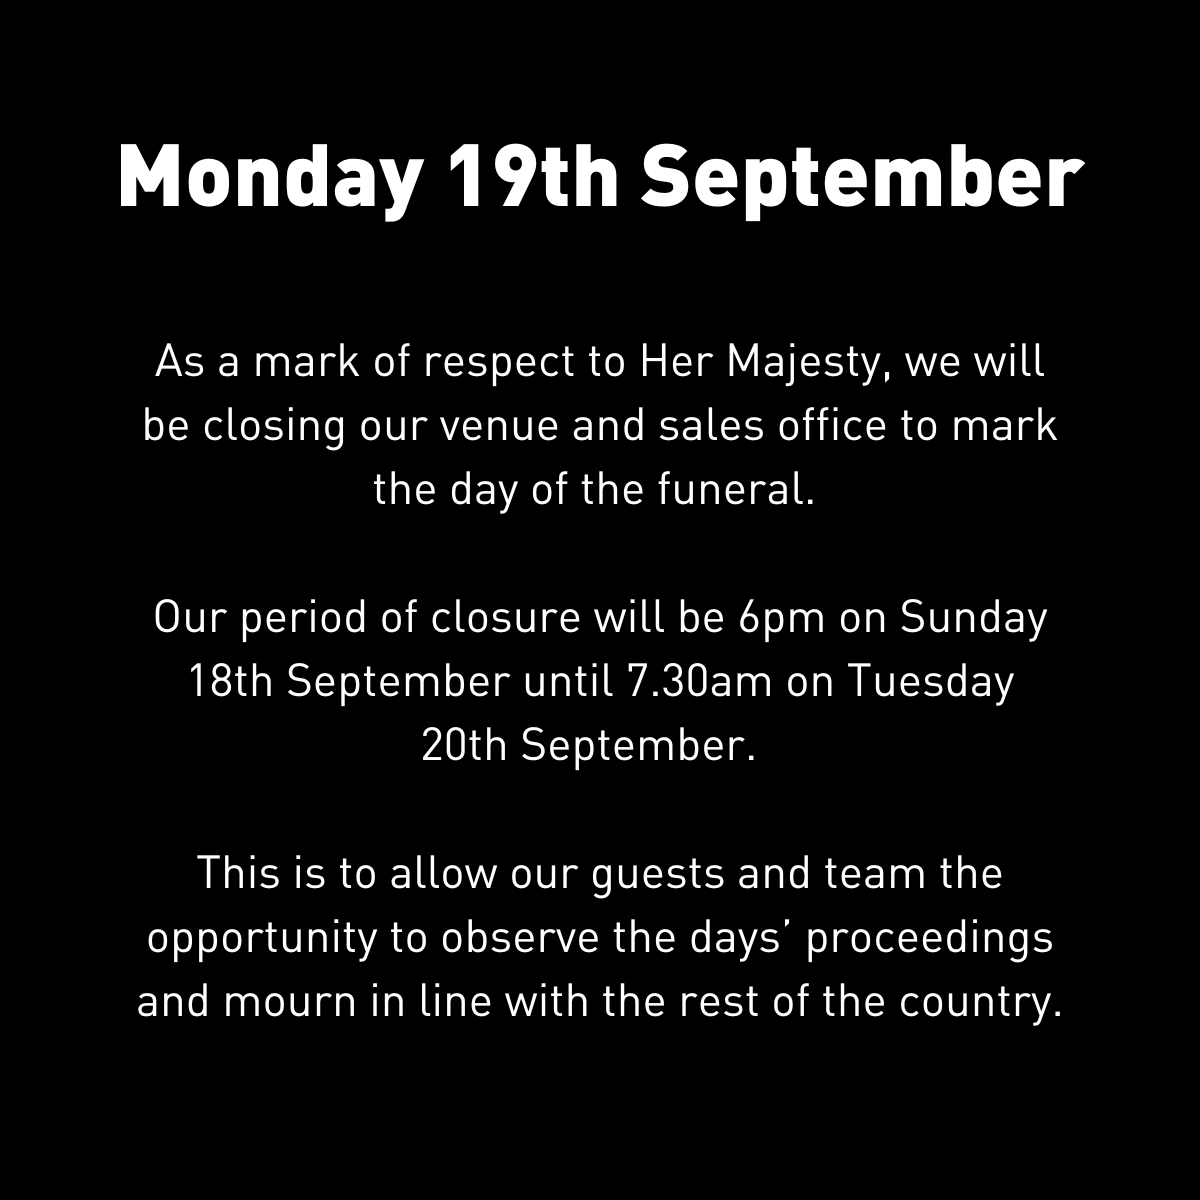 To all our guests and colleagues We will be closing our venue and sales office to mark the day of the funeral. We will be closed from Sunday evening to Tuesday morning to allow our guests and the team to observe and mourn in line with the rest of the country